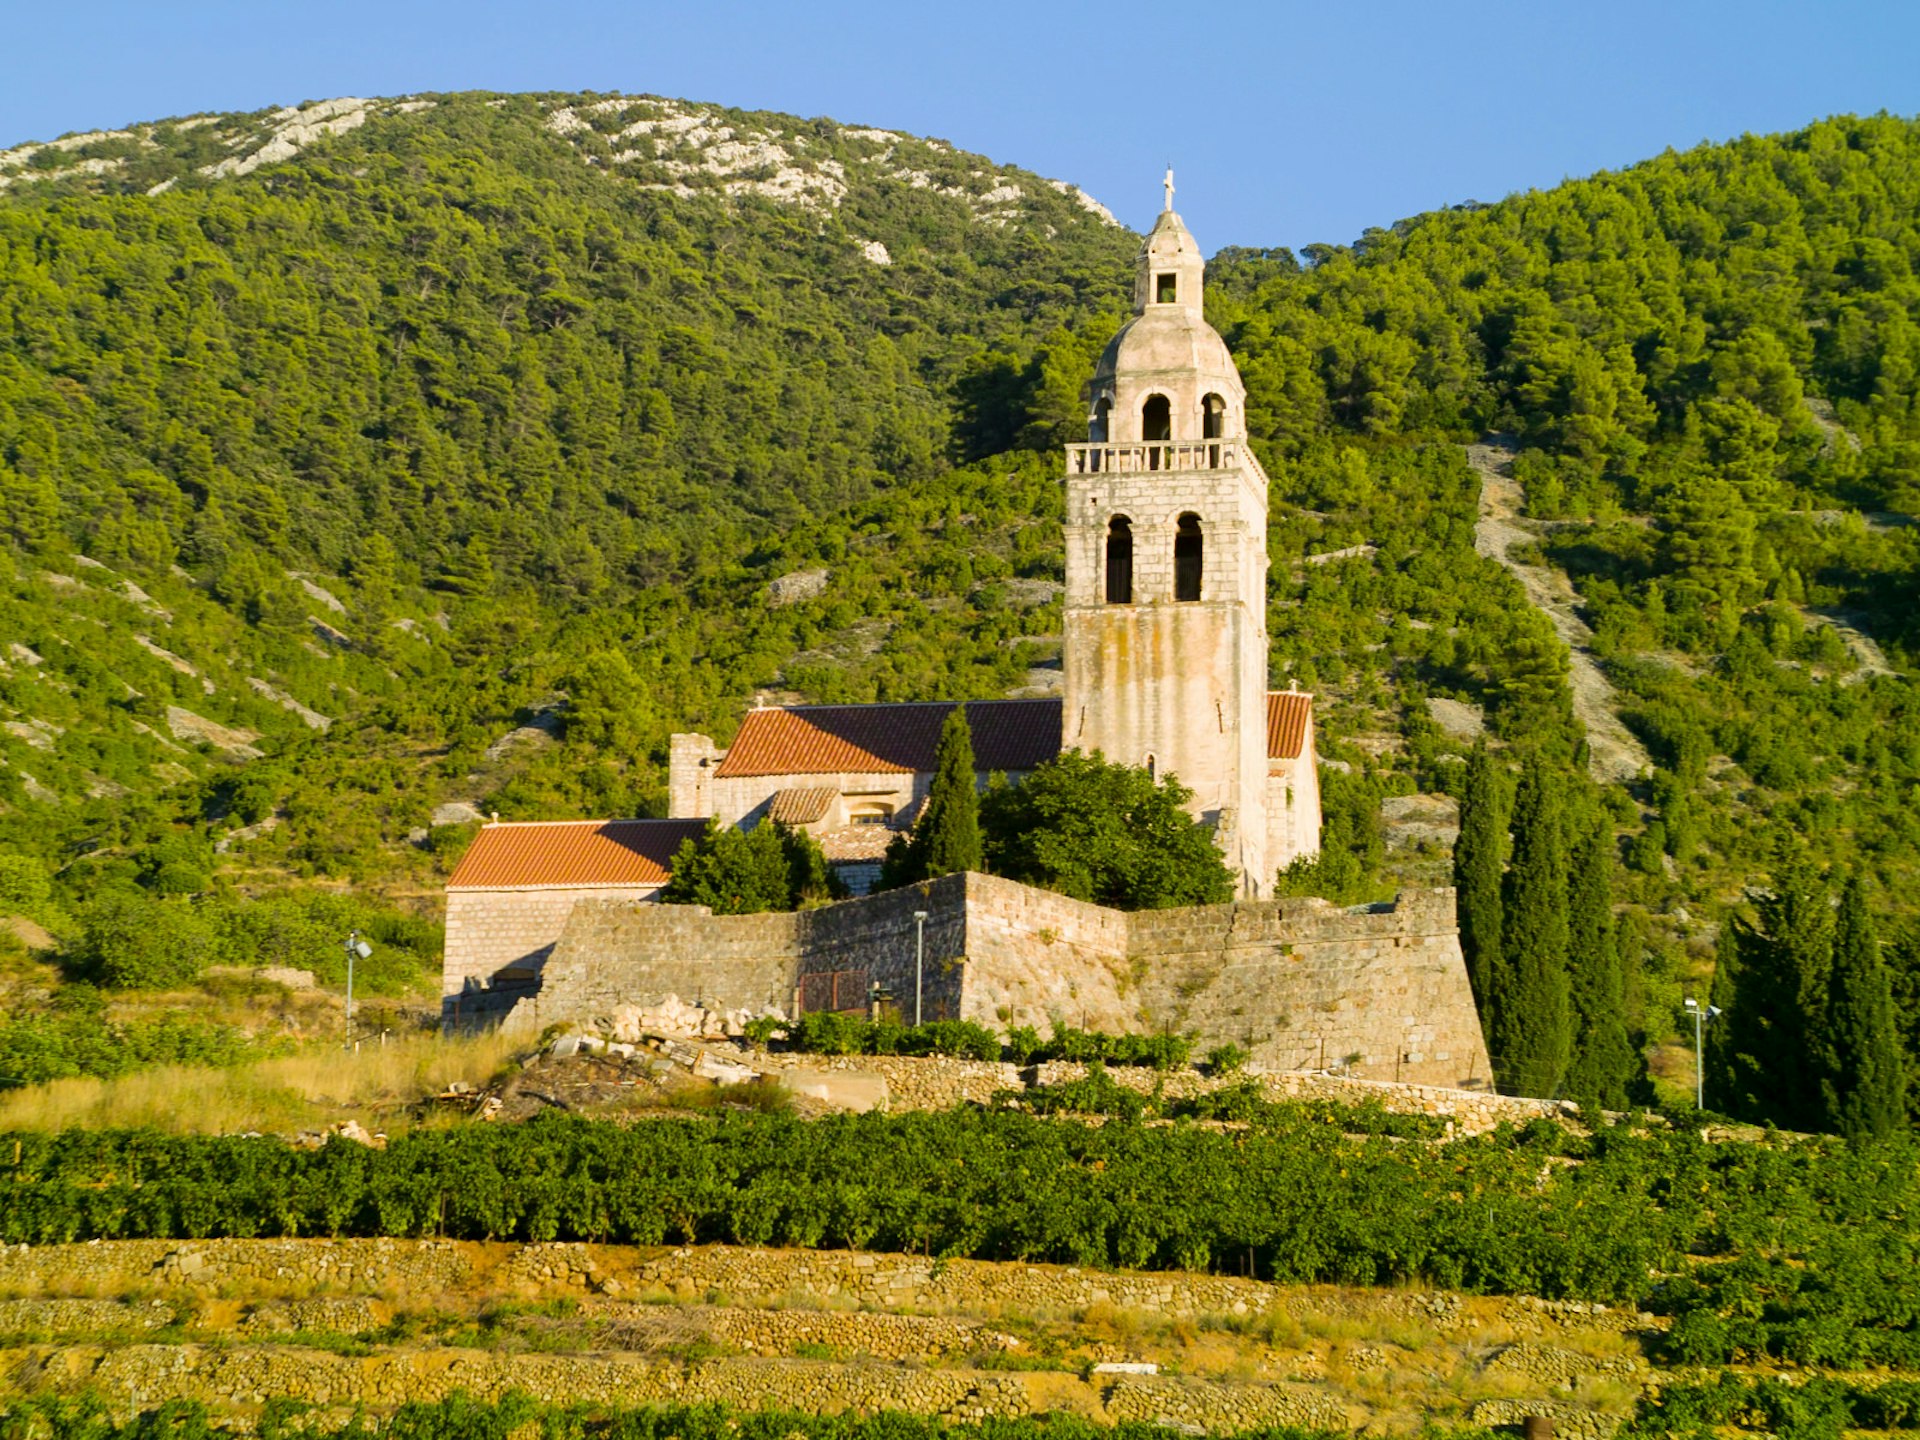 Vineyard and monastery on the Croatian island of Vis © Marnel Tomic / Getty Images